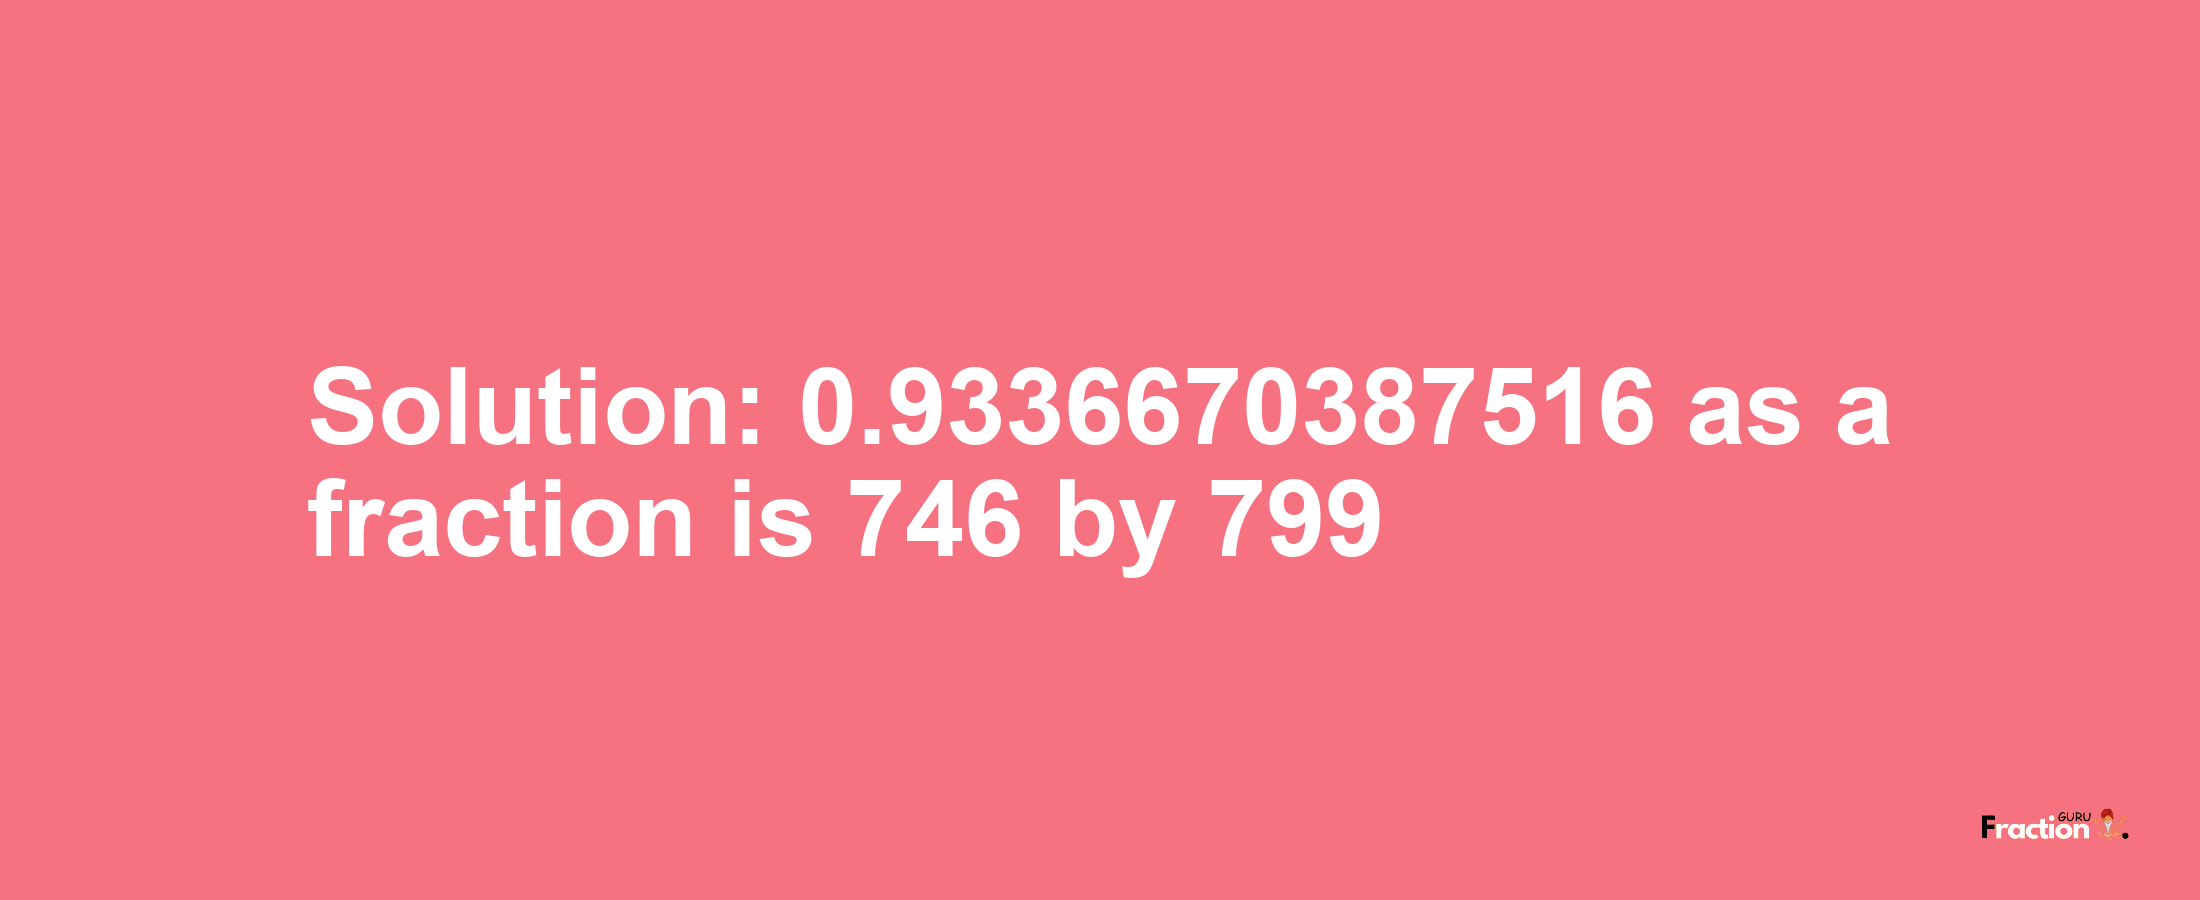 Solution:0.9336670387516 as a fraction is 746/799